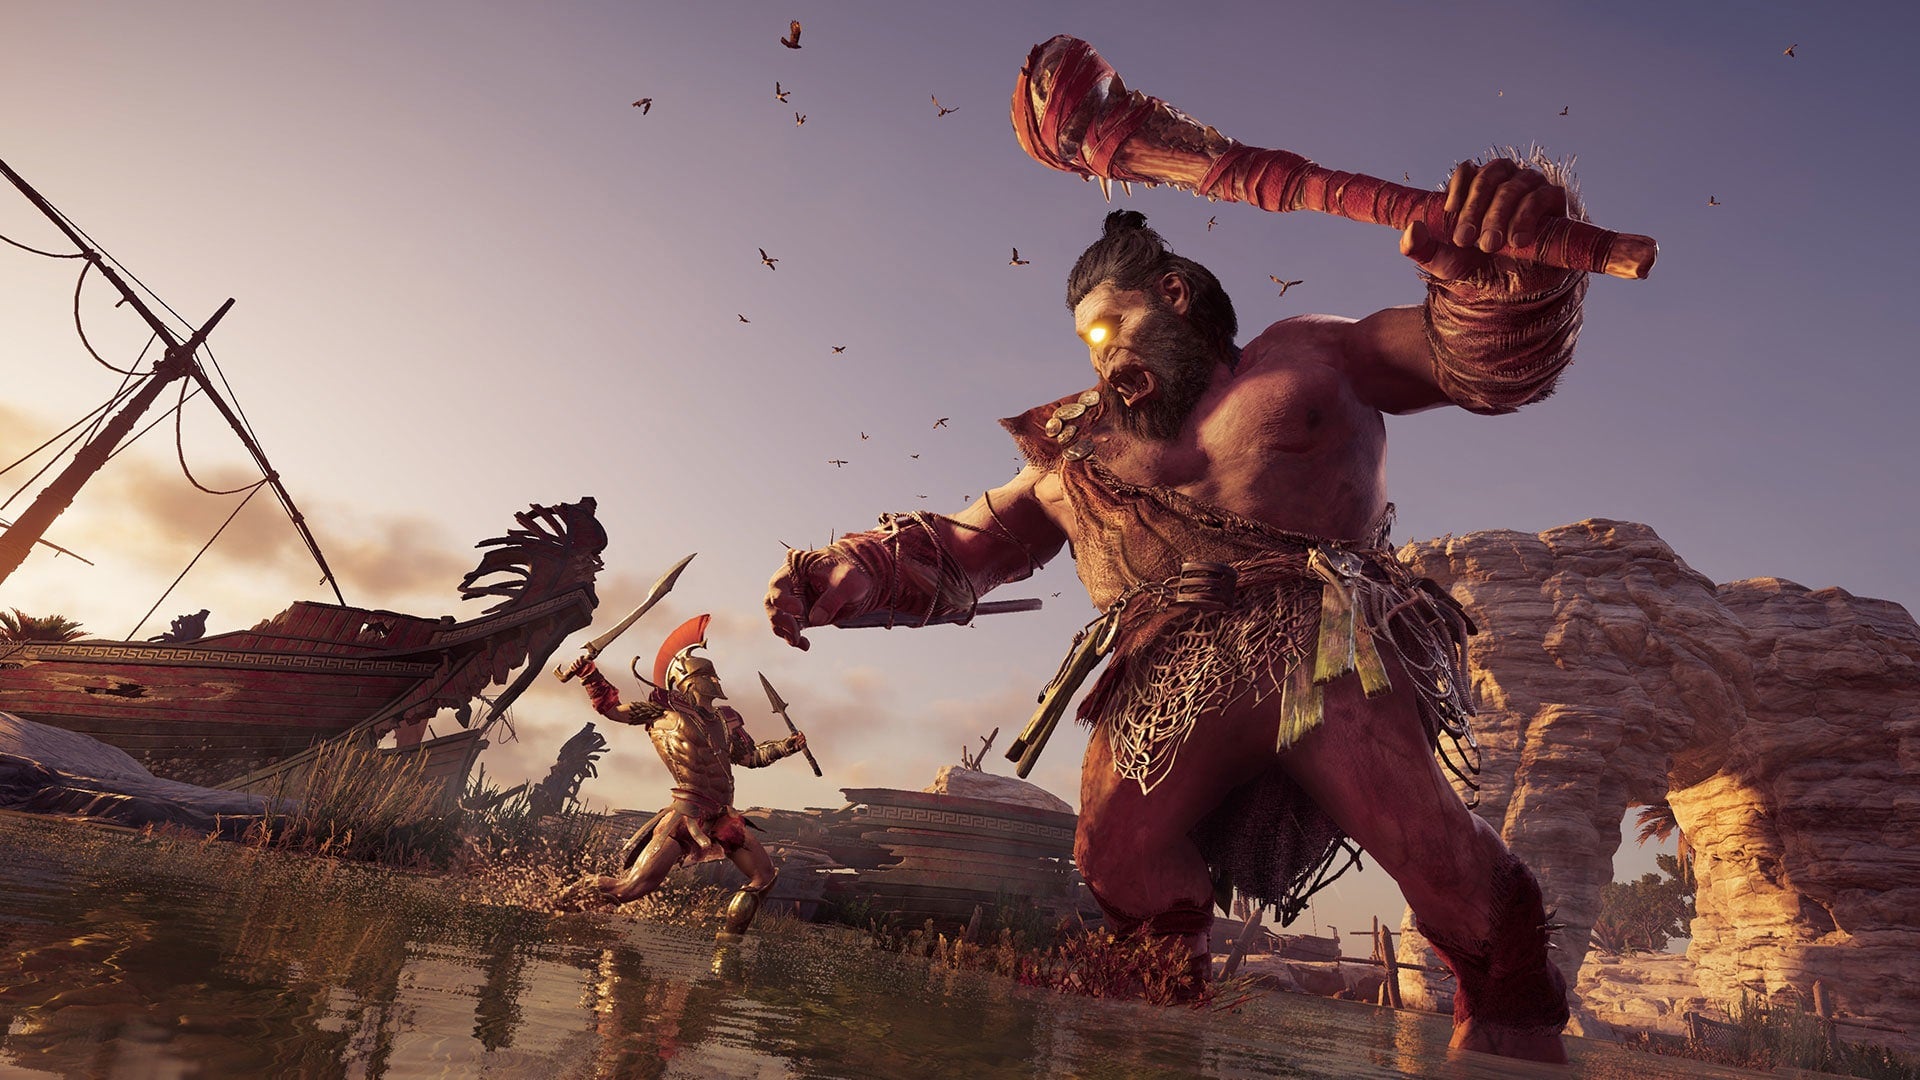 hoste grill øve sig Assassin's Creed Odyssey November updates include Steropes the Cyclops,  level cap increase to 70, more | VG247